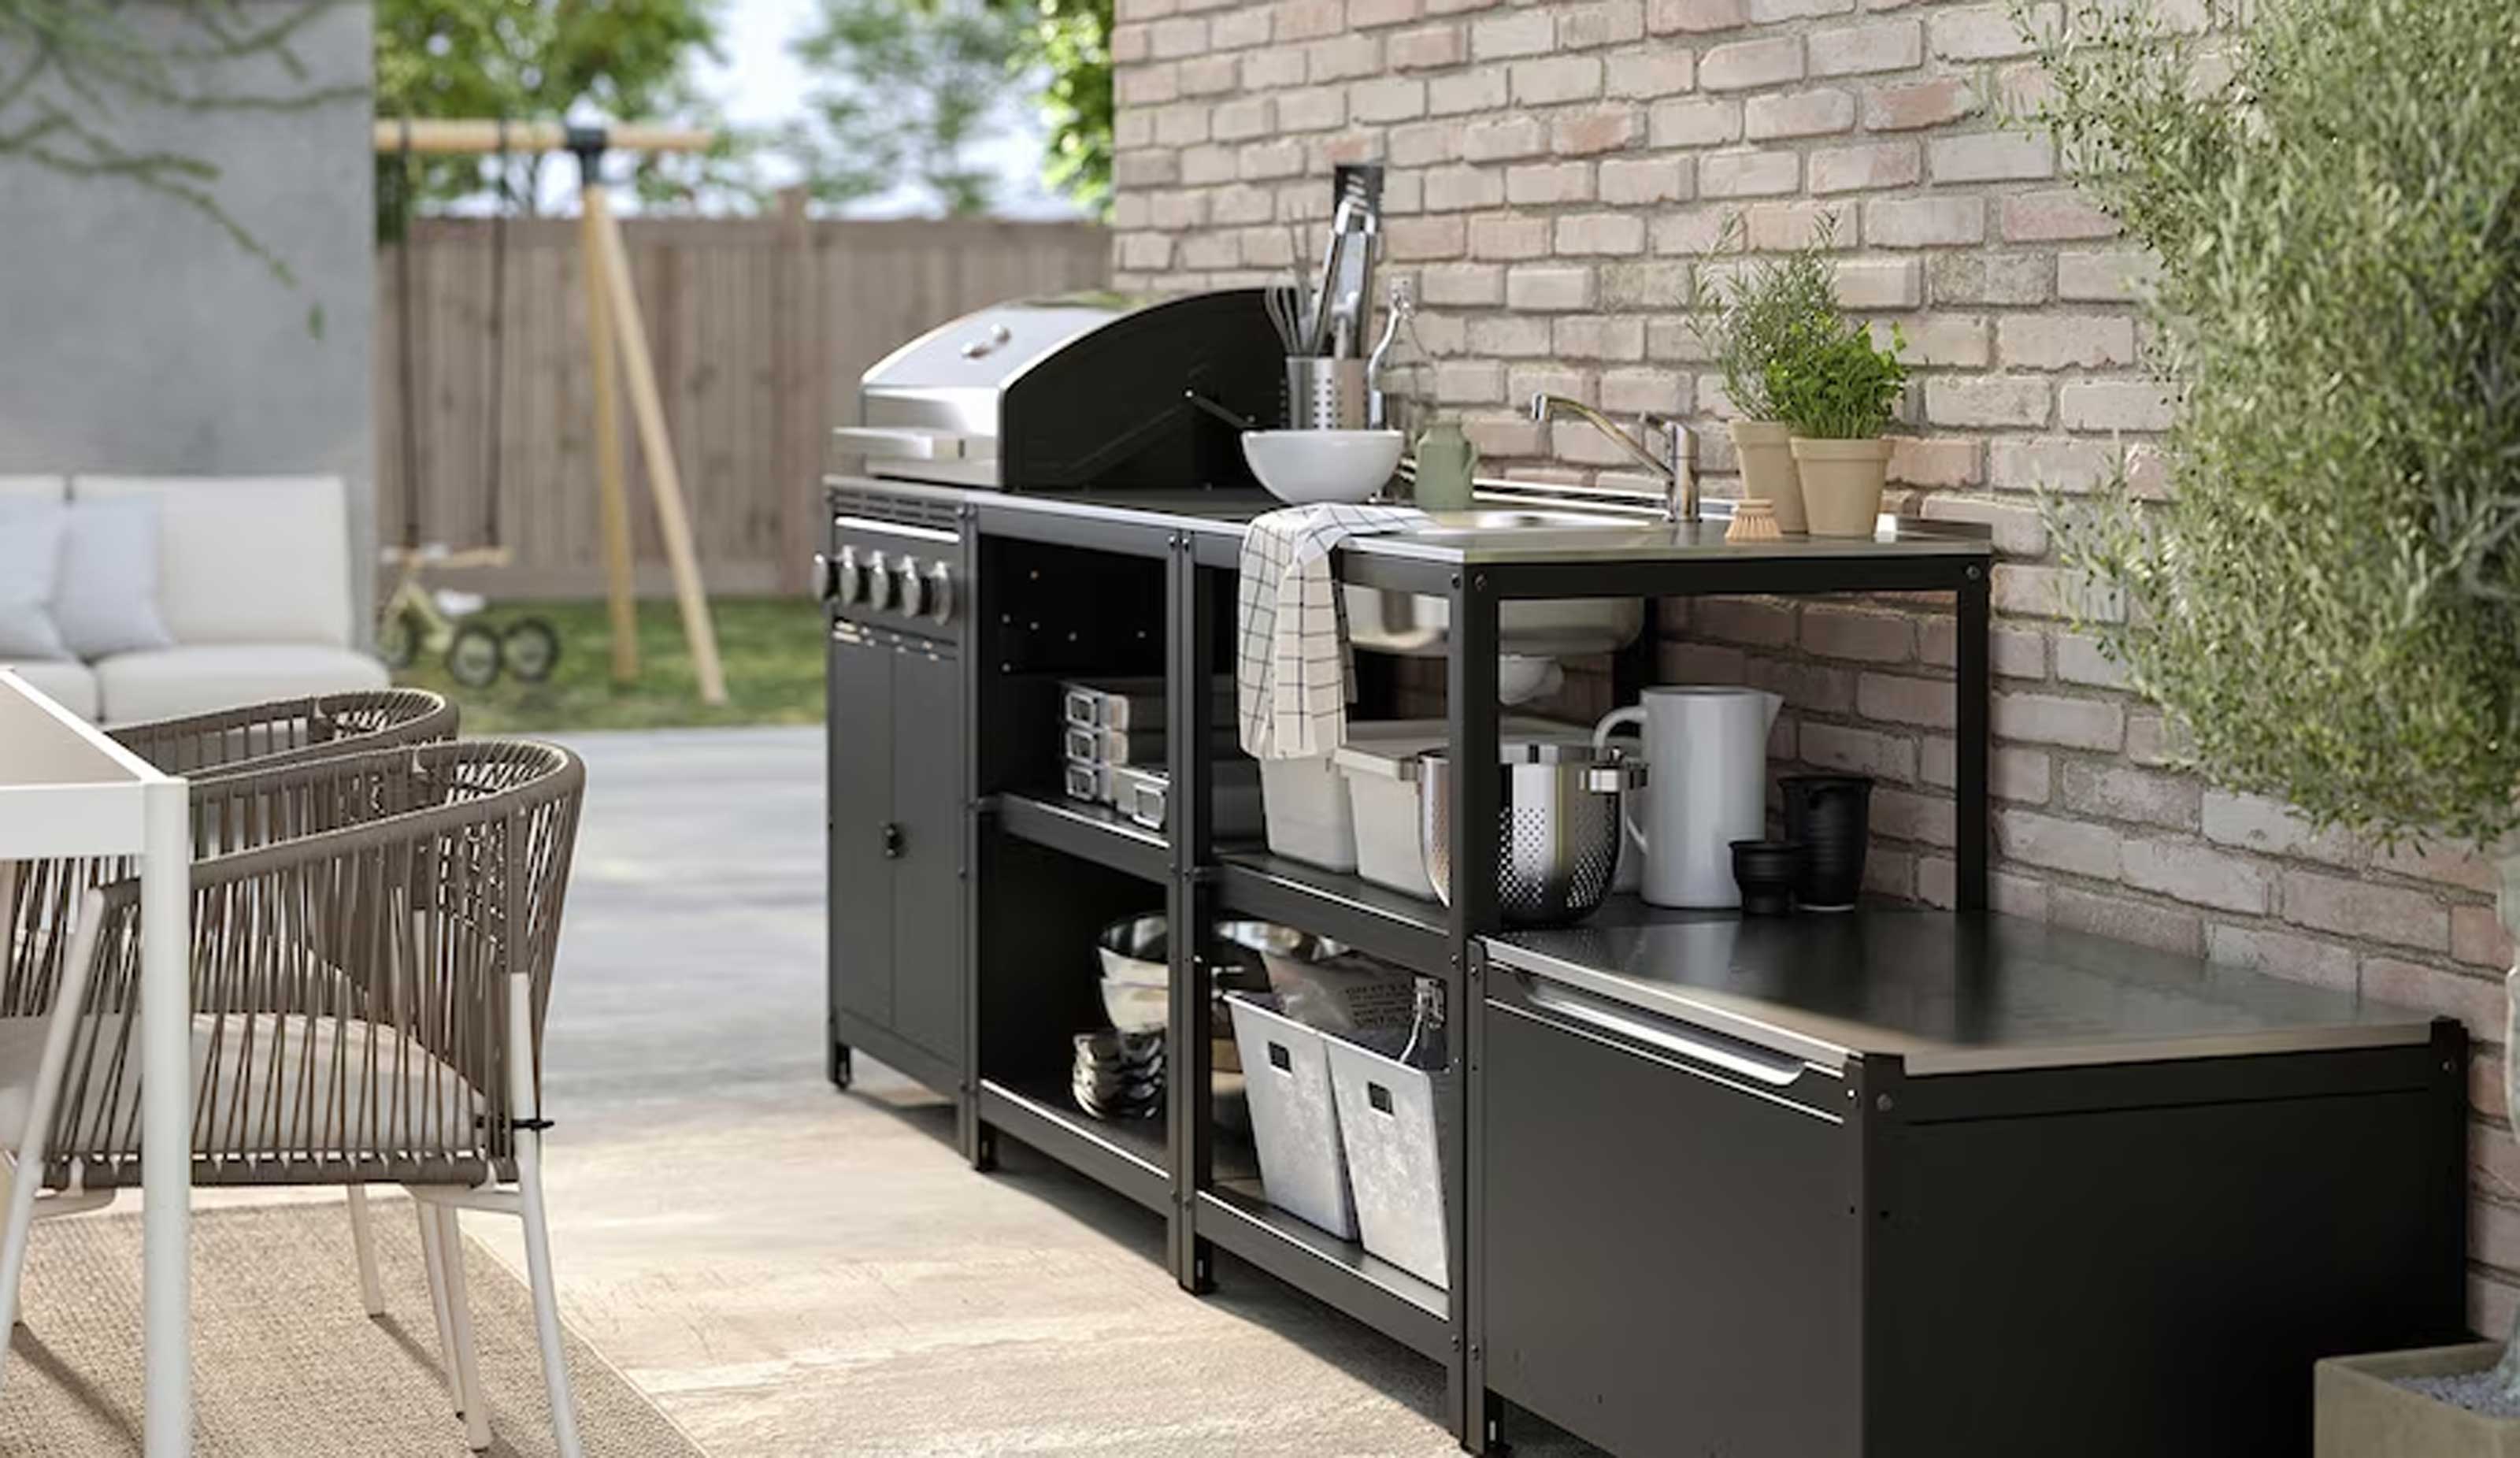 Build a stove for an outdoor kitchen with this Ikea hack.